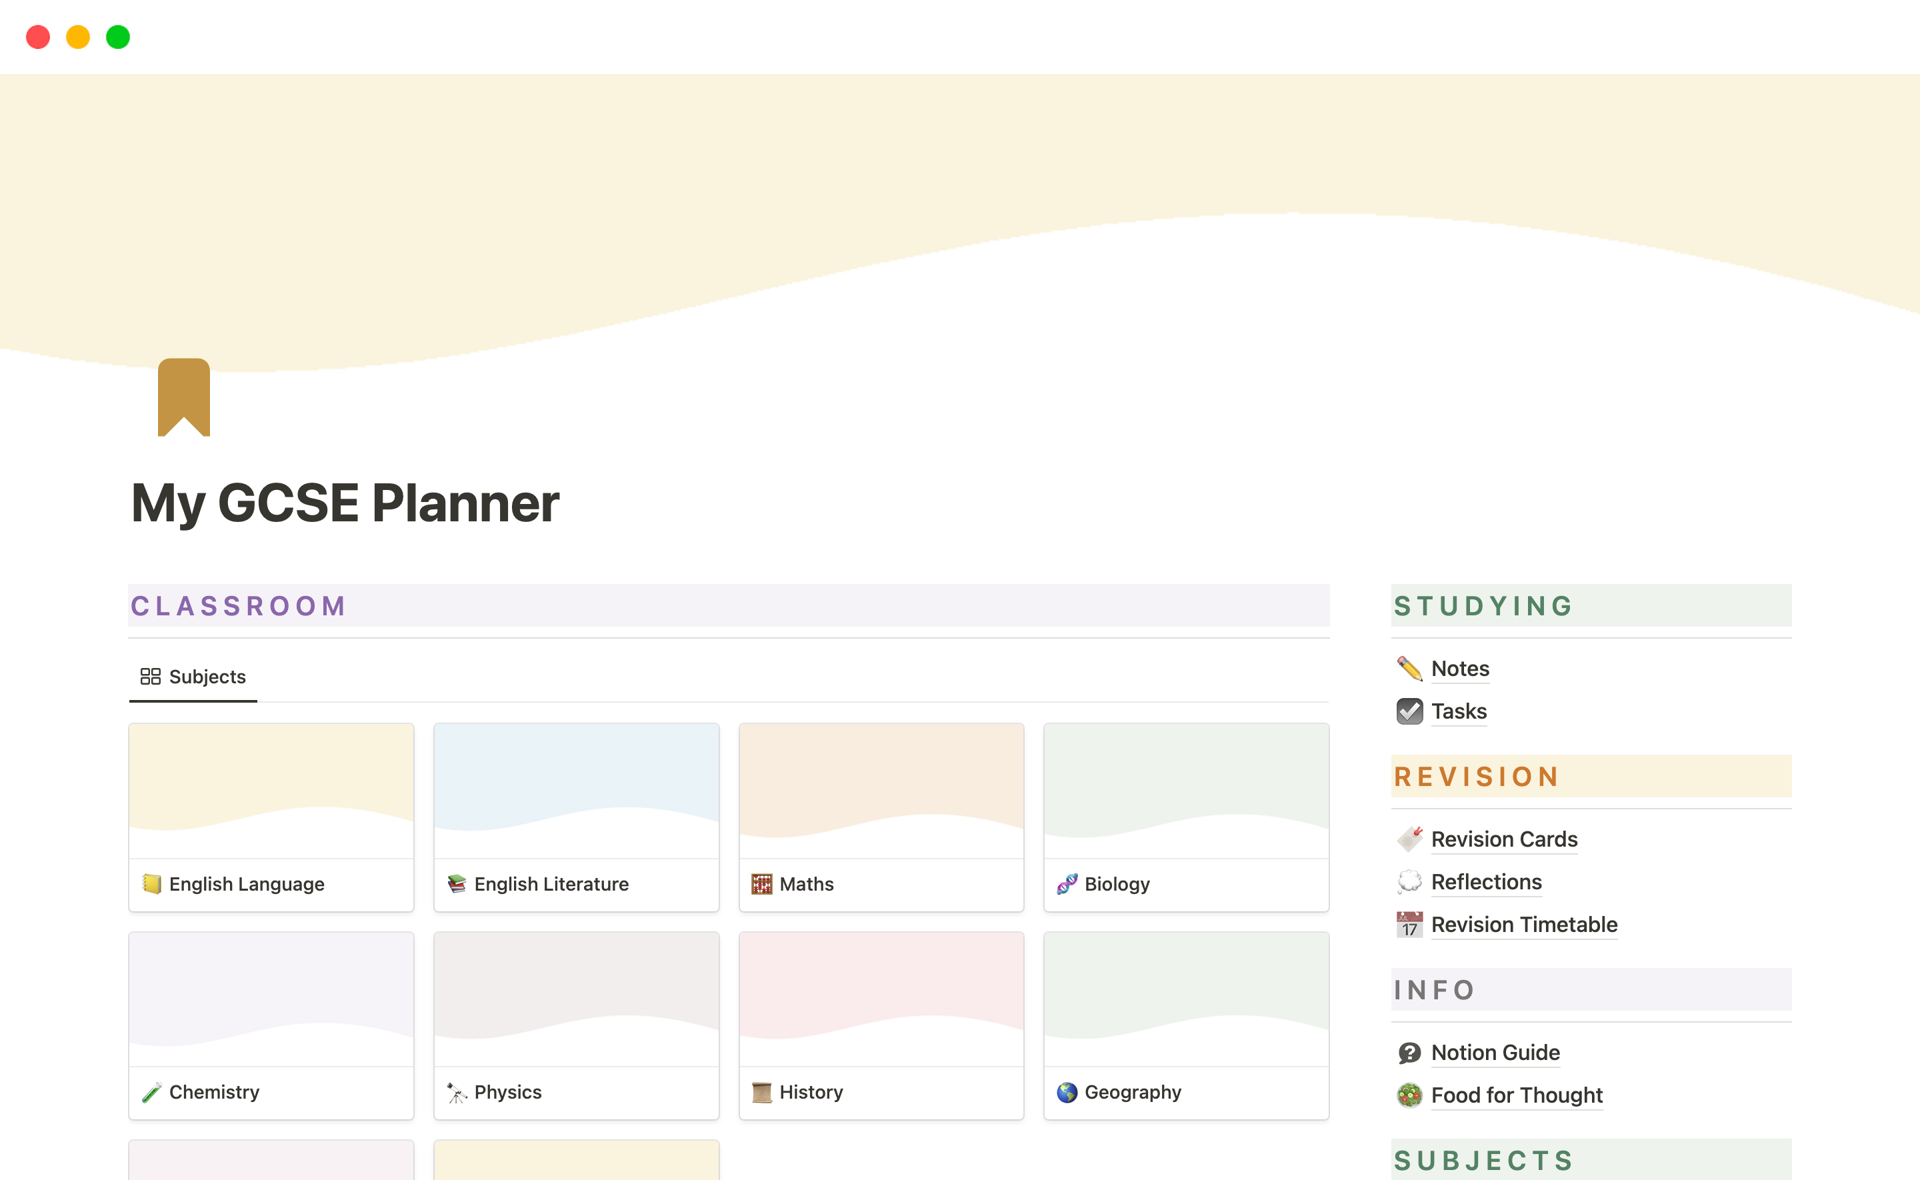 Student and school planner for GCSE students to organise their subjects.